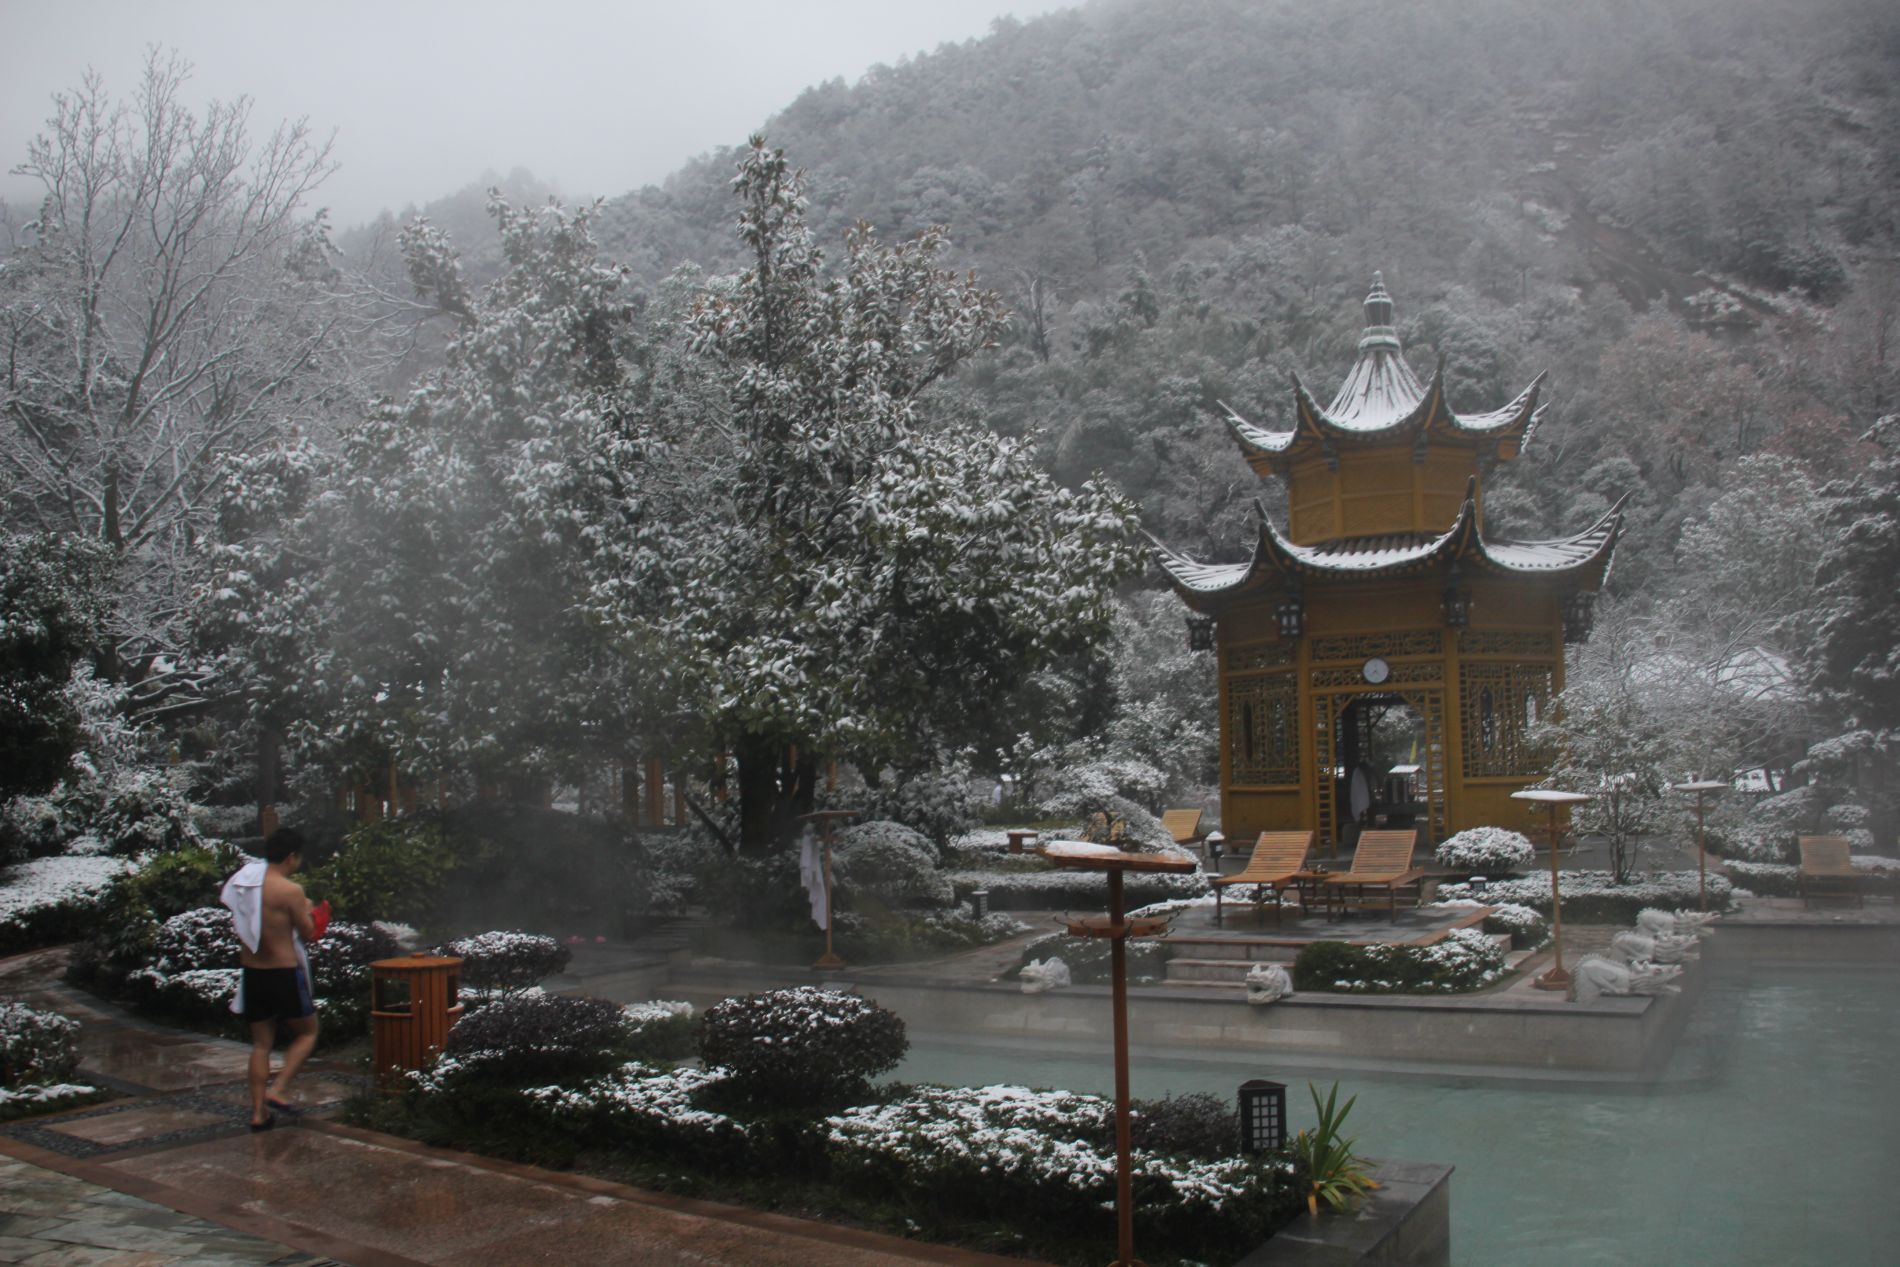 The hot springs resort, covered in snow, near Huangshan.